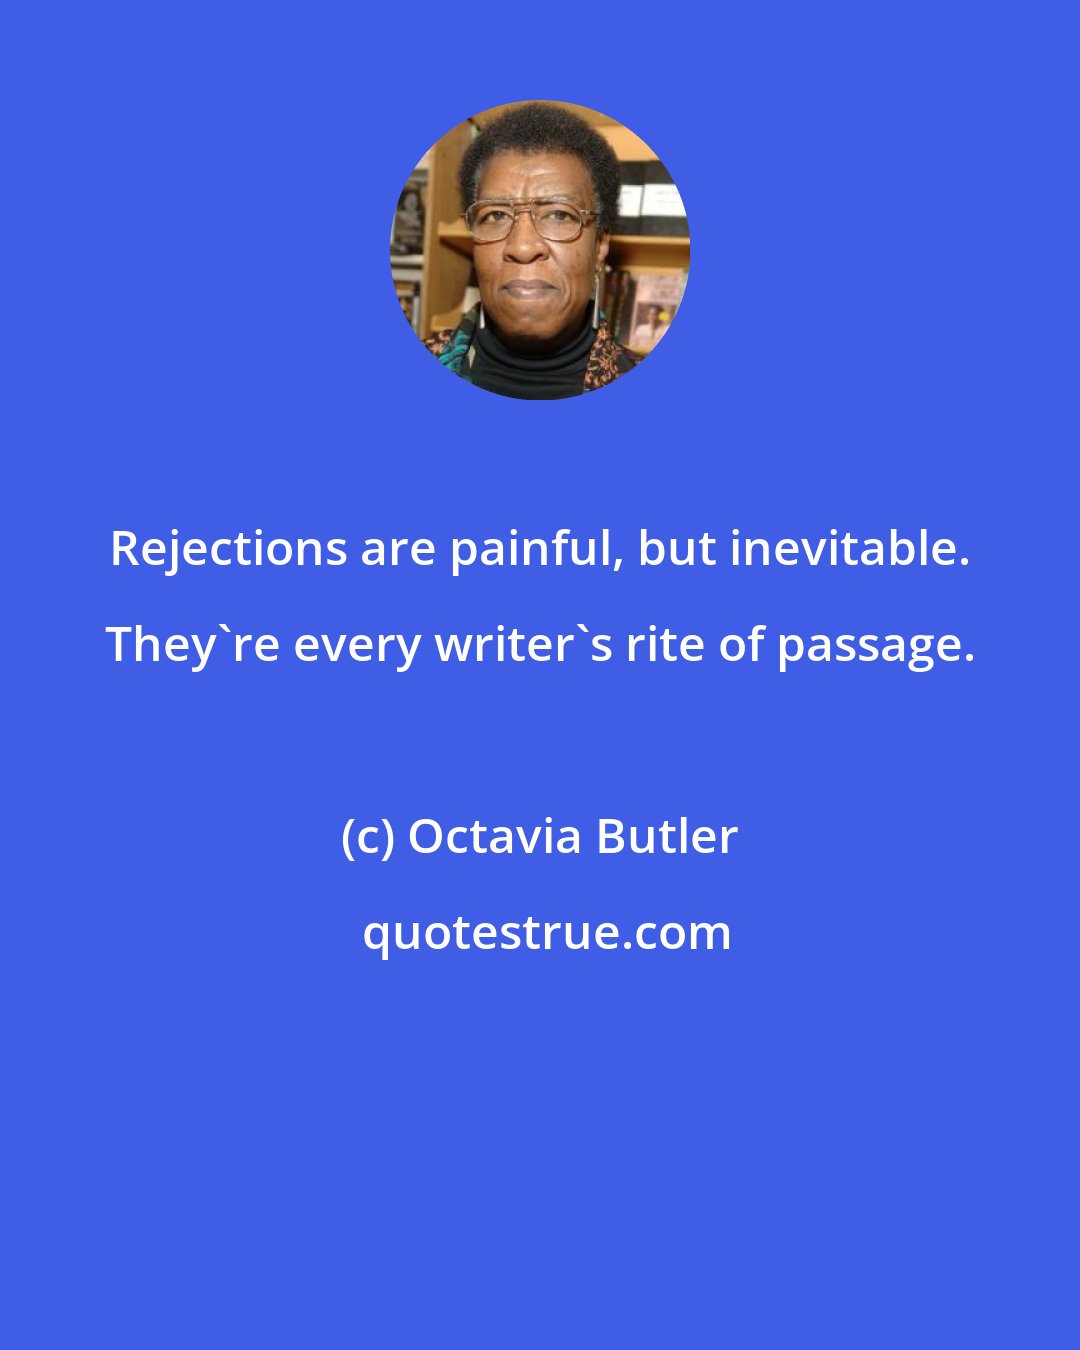 Octavia Butler: Rejections are painful, but inevitable. They're every writer's rite of passage.